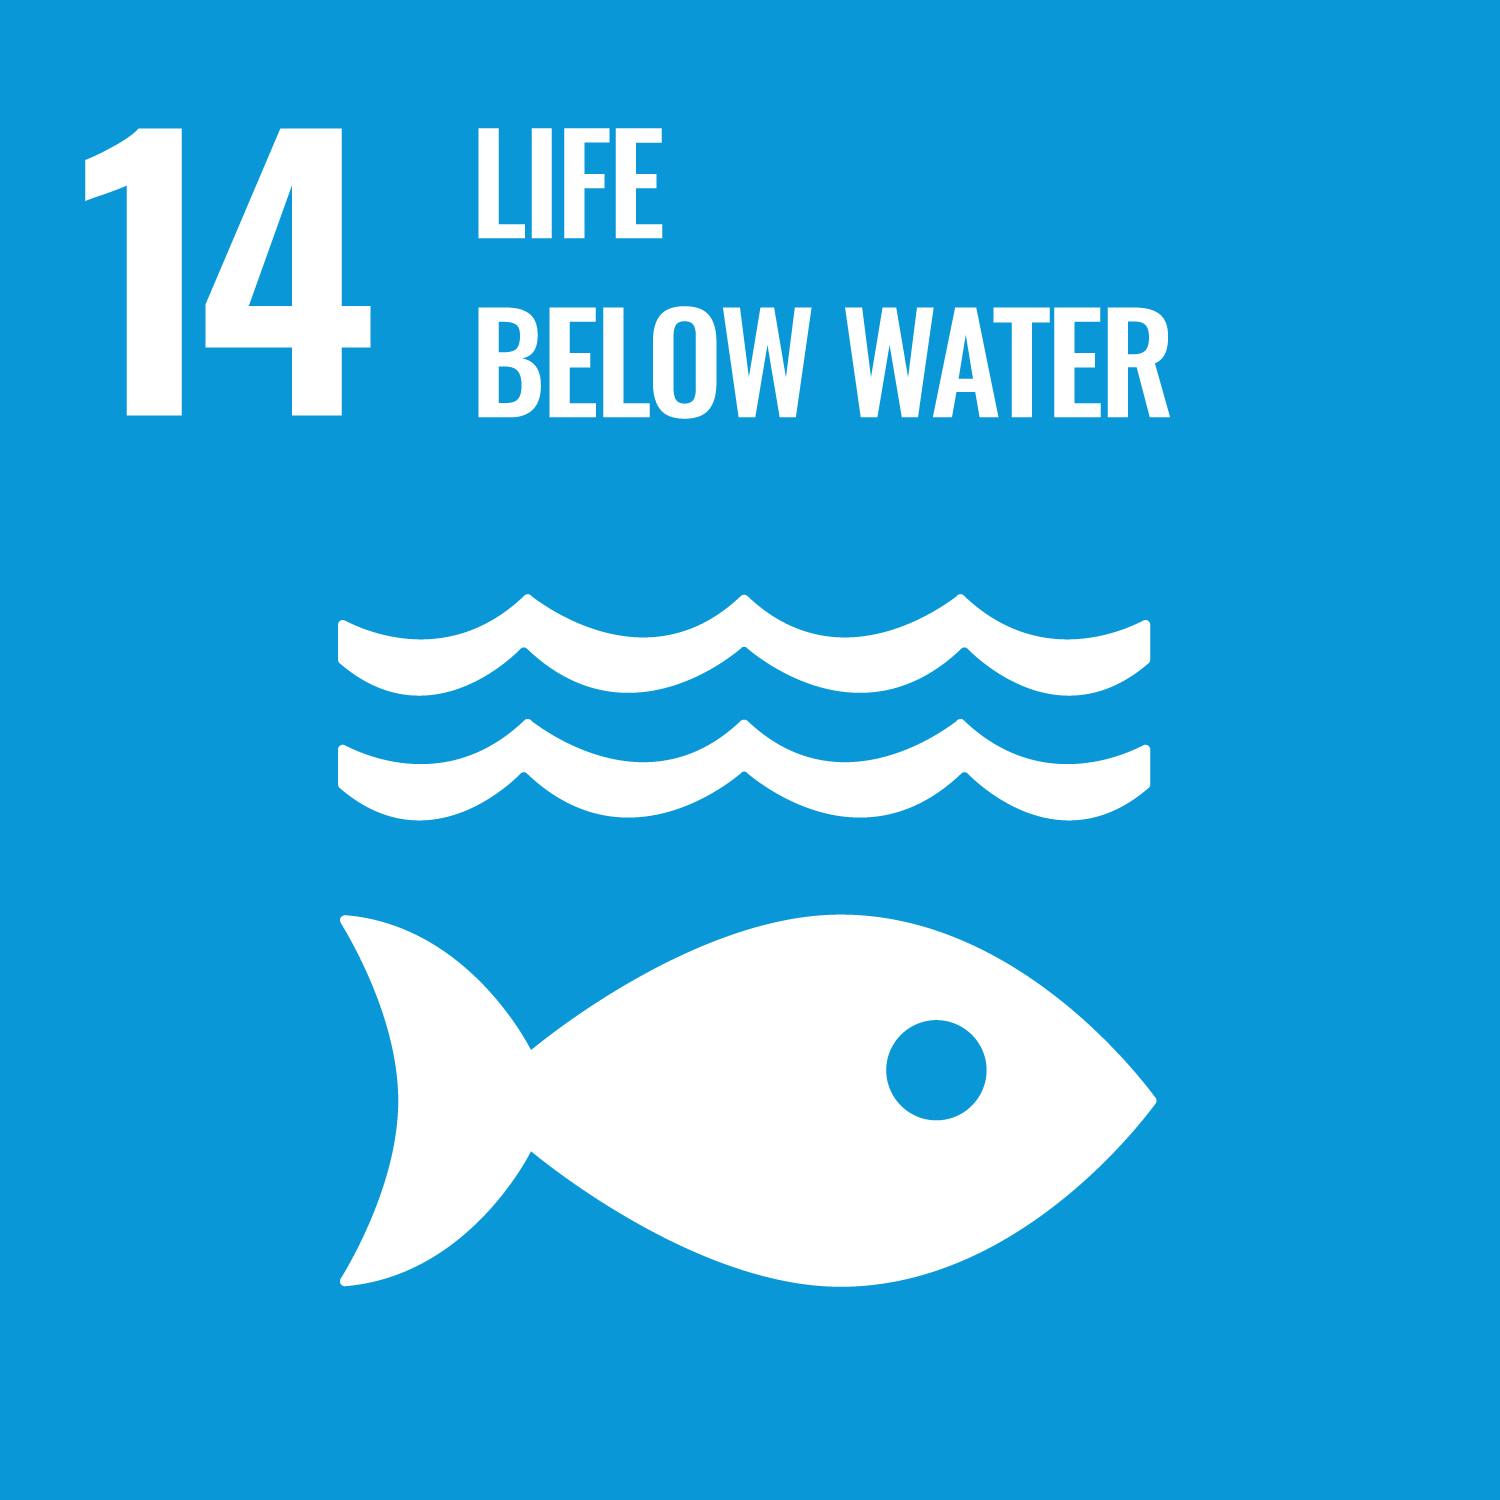 An icon of a fish swimming below some waves in the ocean is placed over a blue background. The icon has the number 14 and the words Life Below Water in the top left corner of the image.